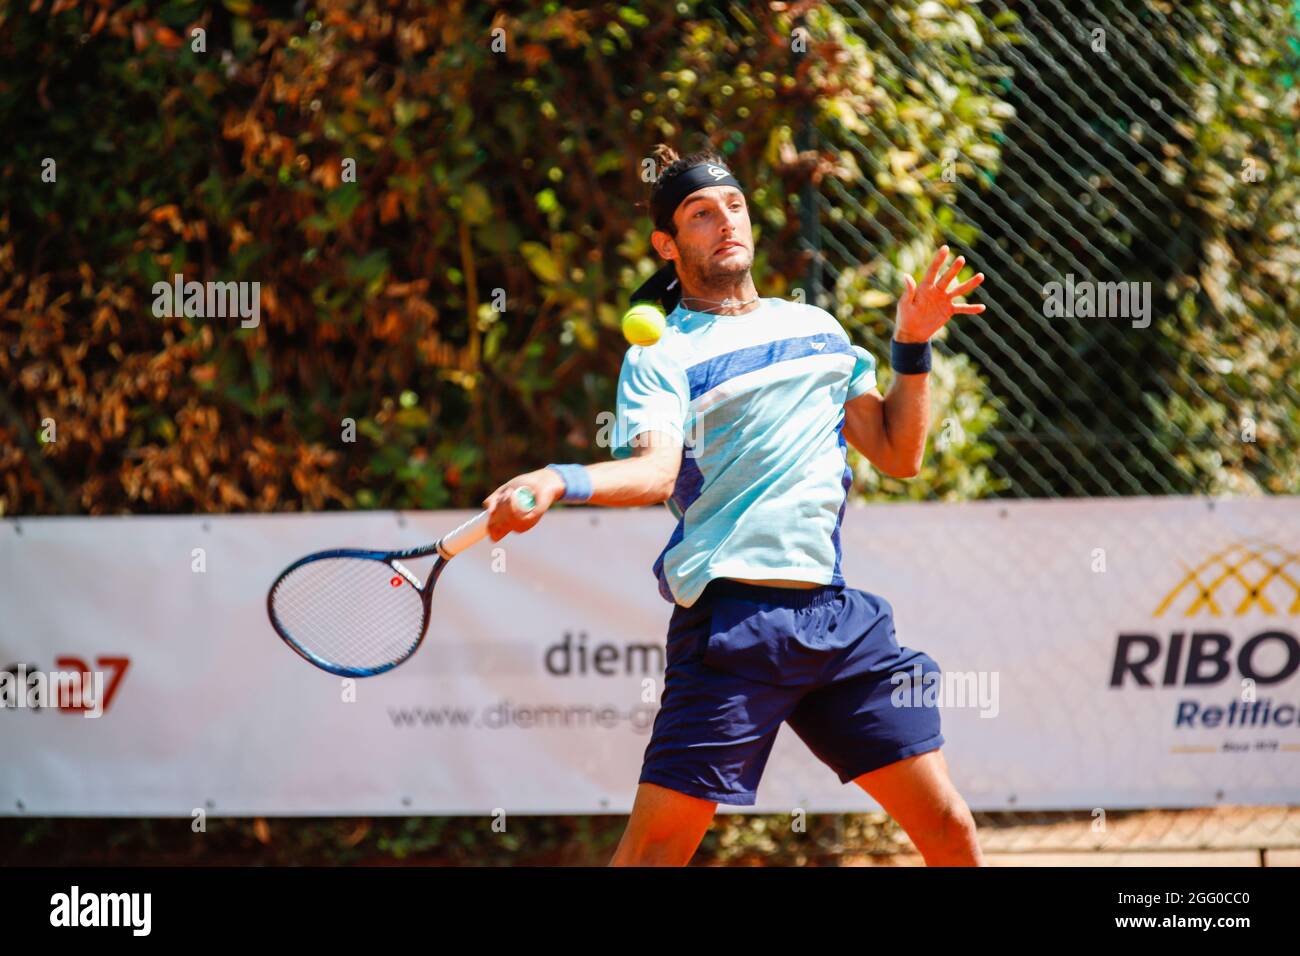 Andrea Picchione from Italy during Lesa Cup 2021 - ITF, Tennis Internationals in Lesa (NO), Italy, August 27 2021 Stock Photo